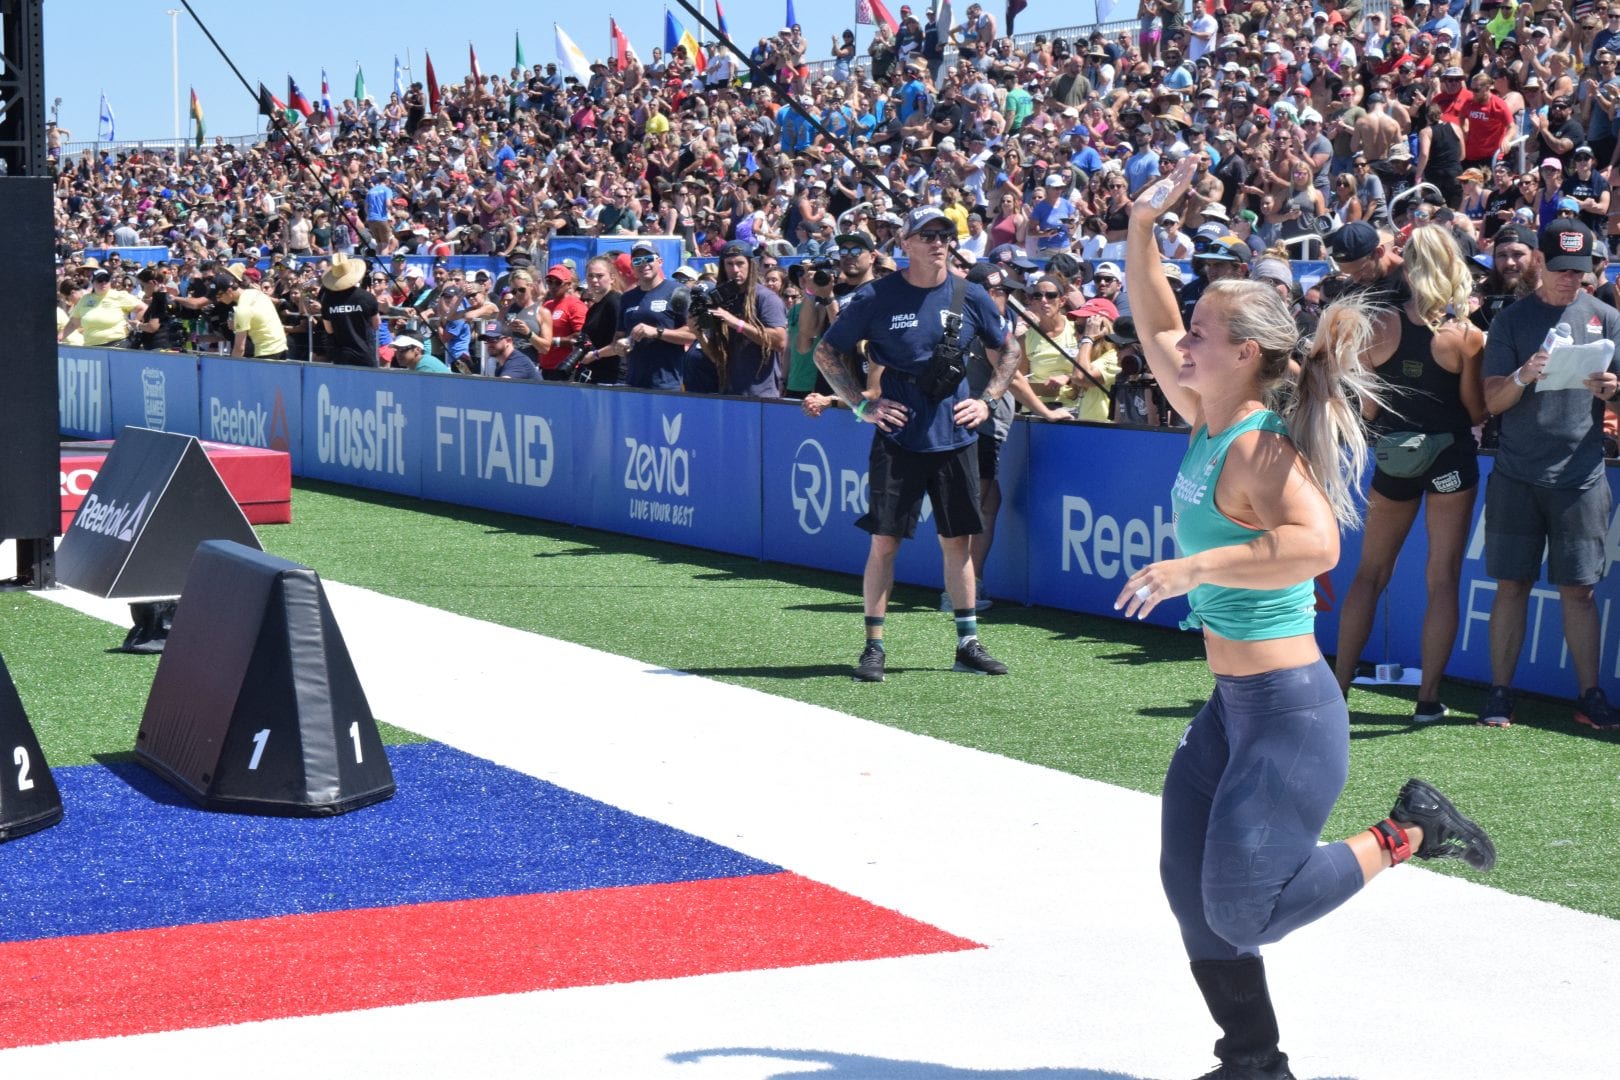 Dani Speegle waves to the crowd as she enters the stadium for the 2019 CrossFit Games